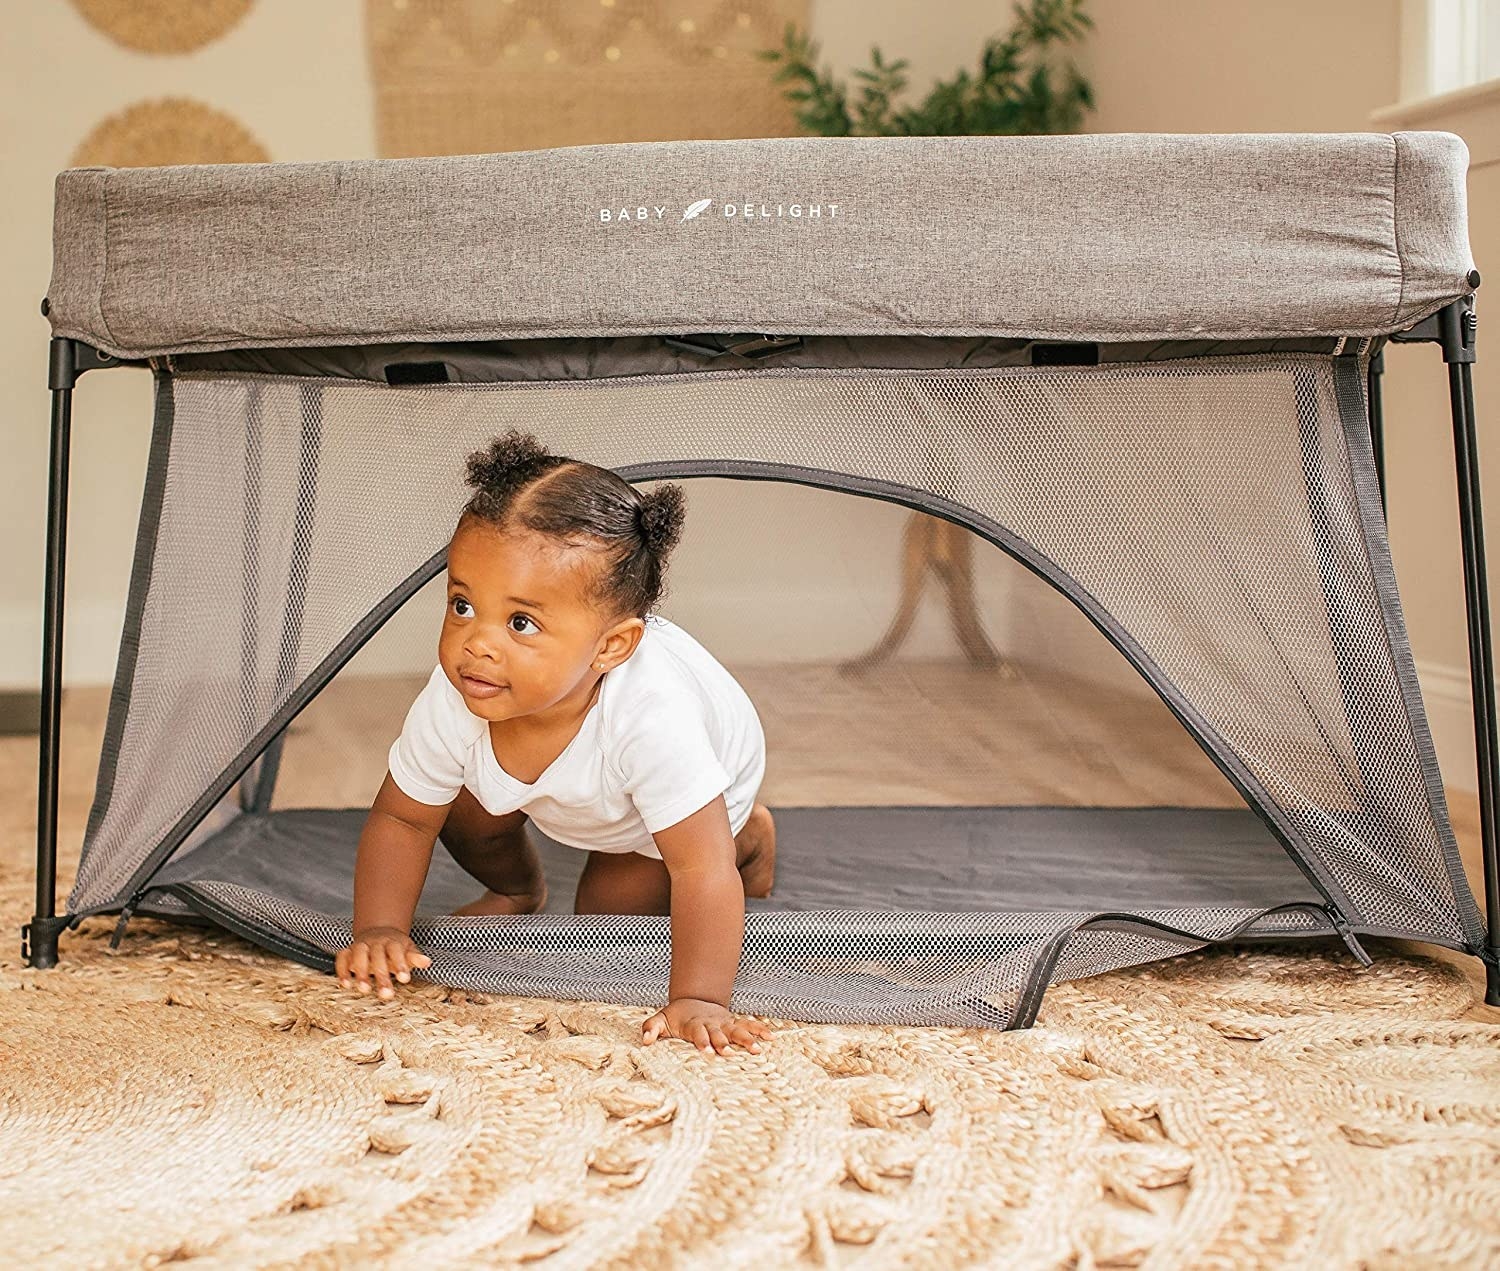 A kid-friendly, baby proof yet stylish living room, ohjoy 2.0